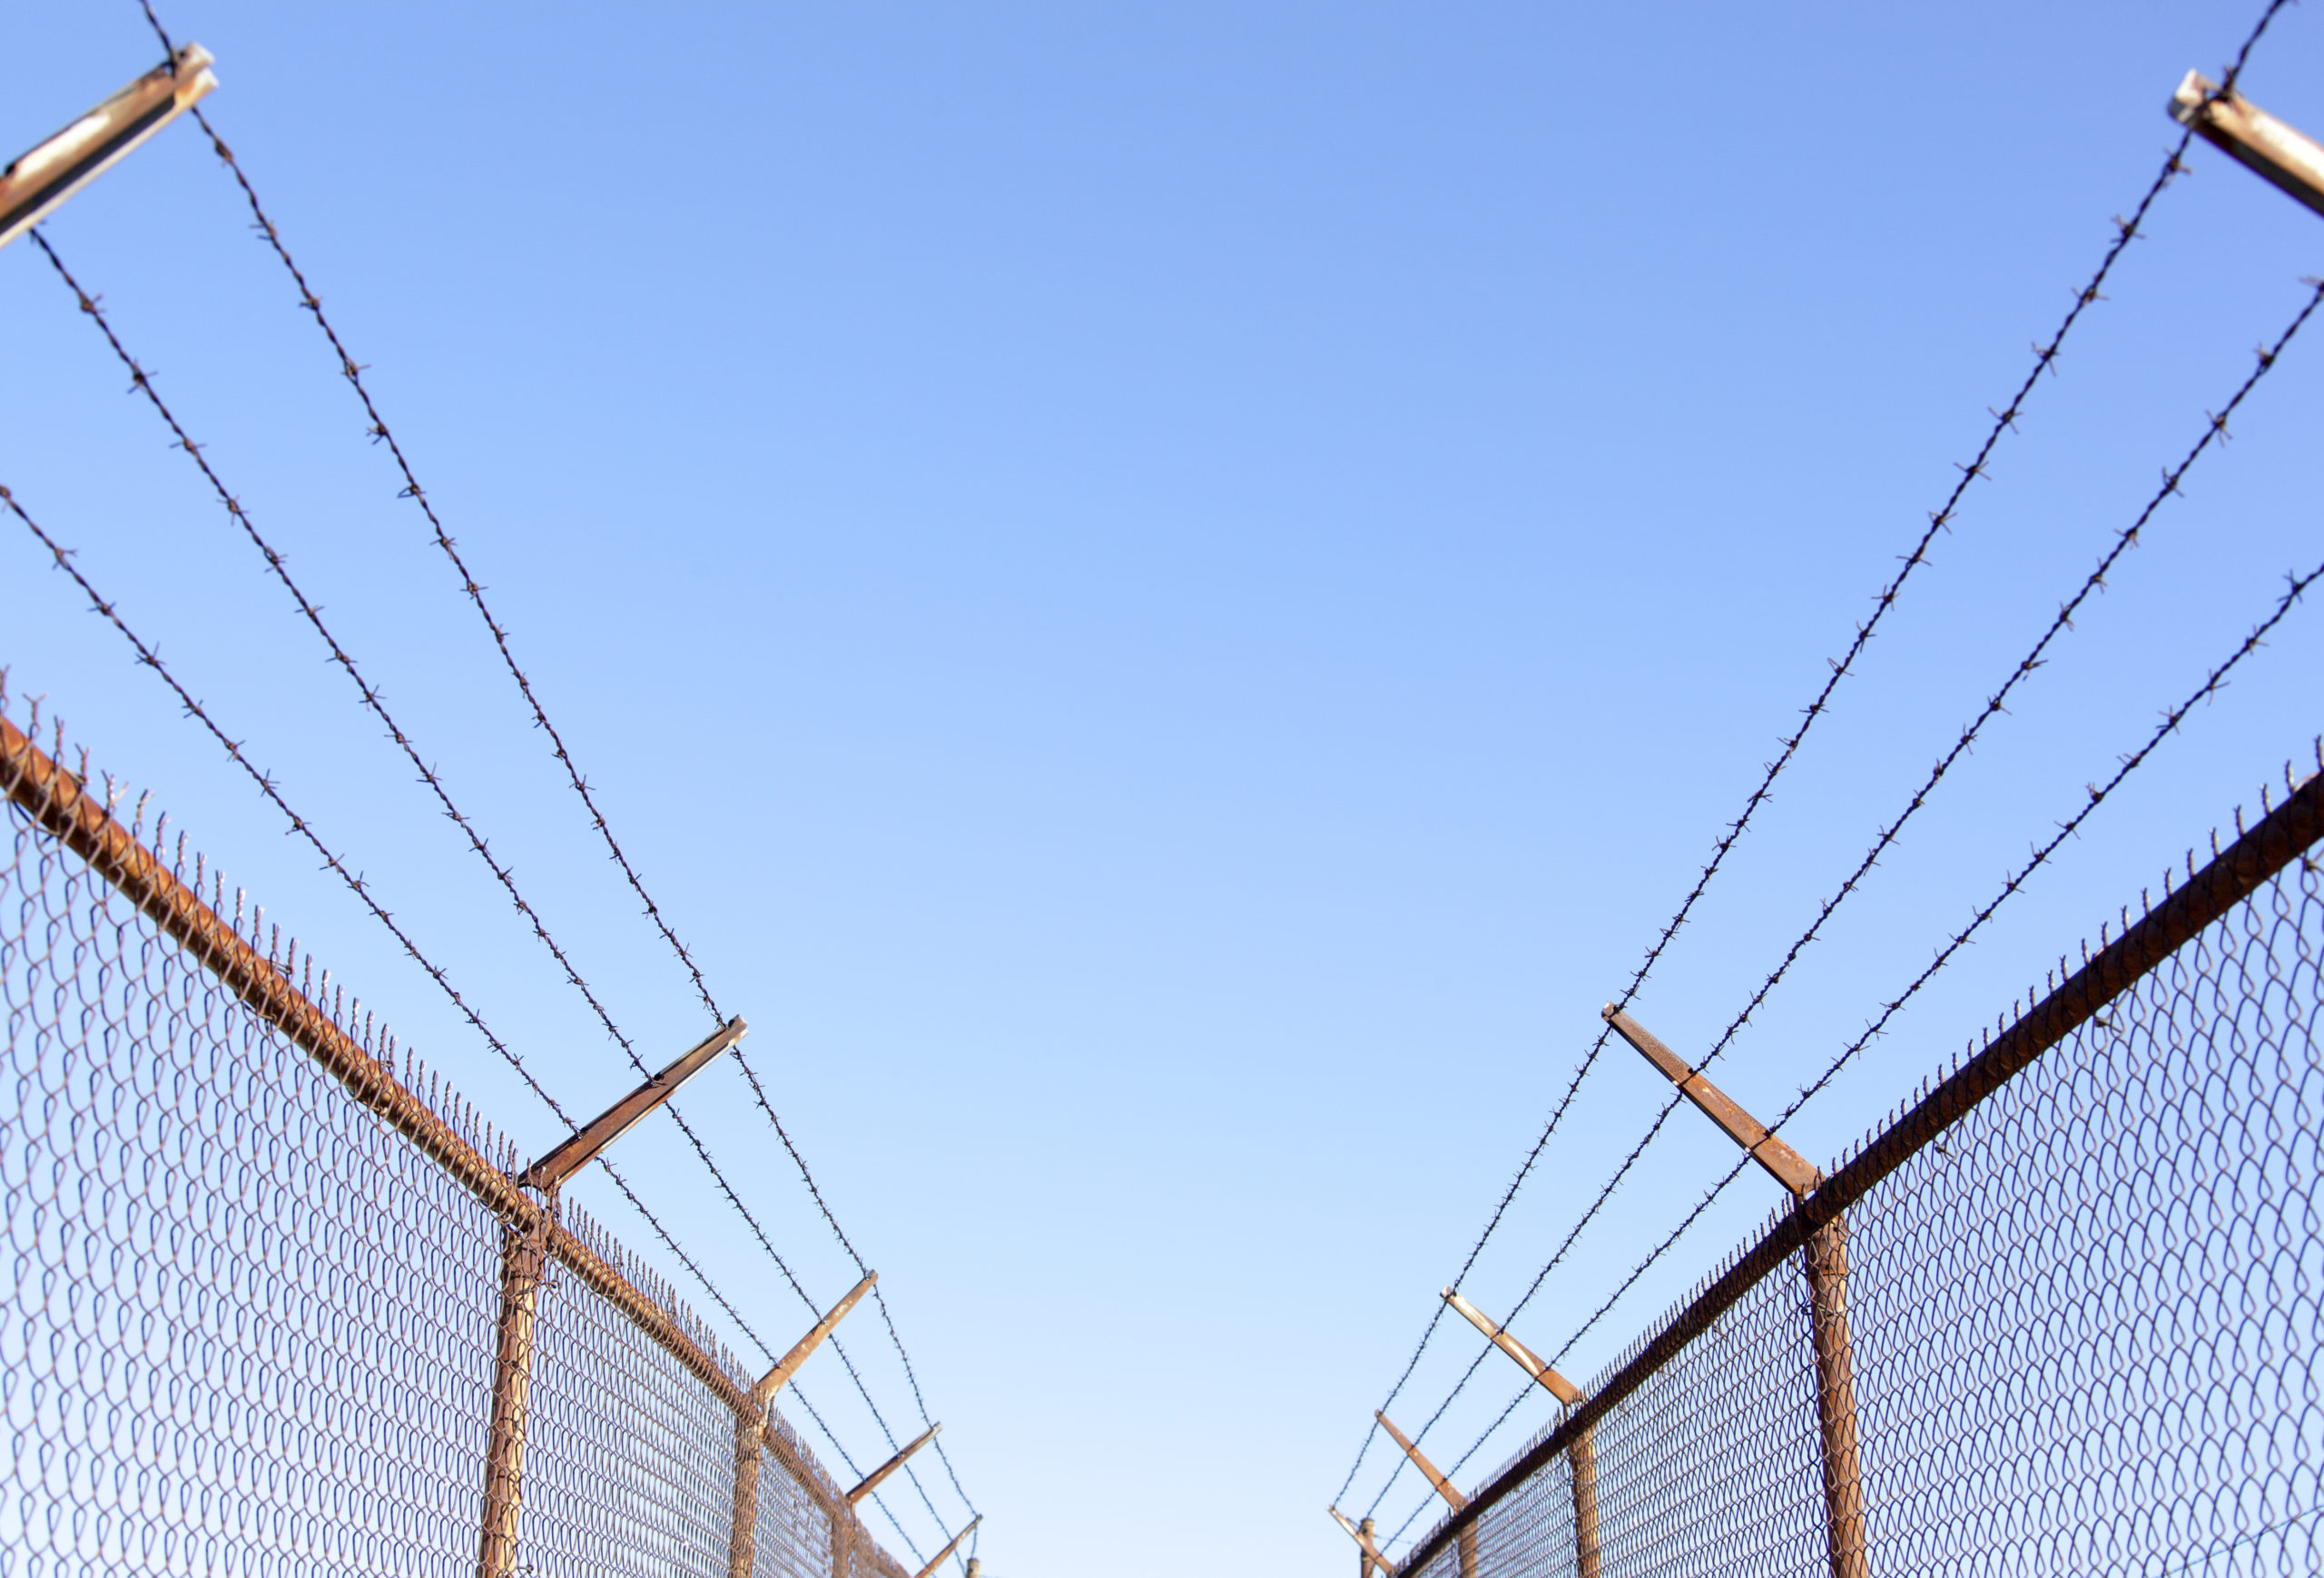 A view of barbed chain linked fences on either side of the viewer, under a blue sky.